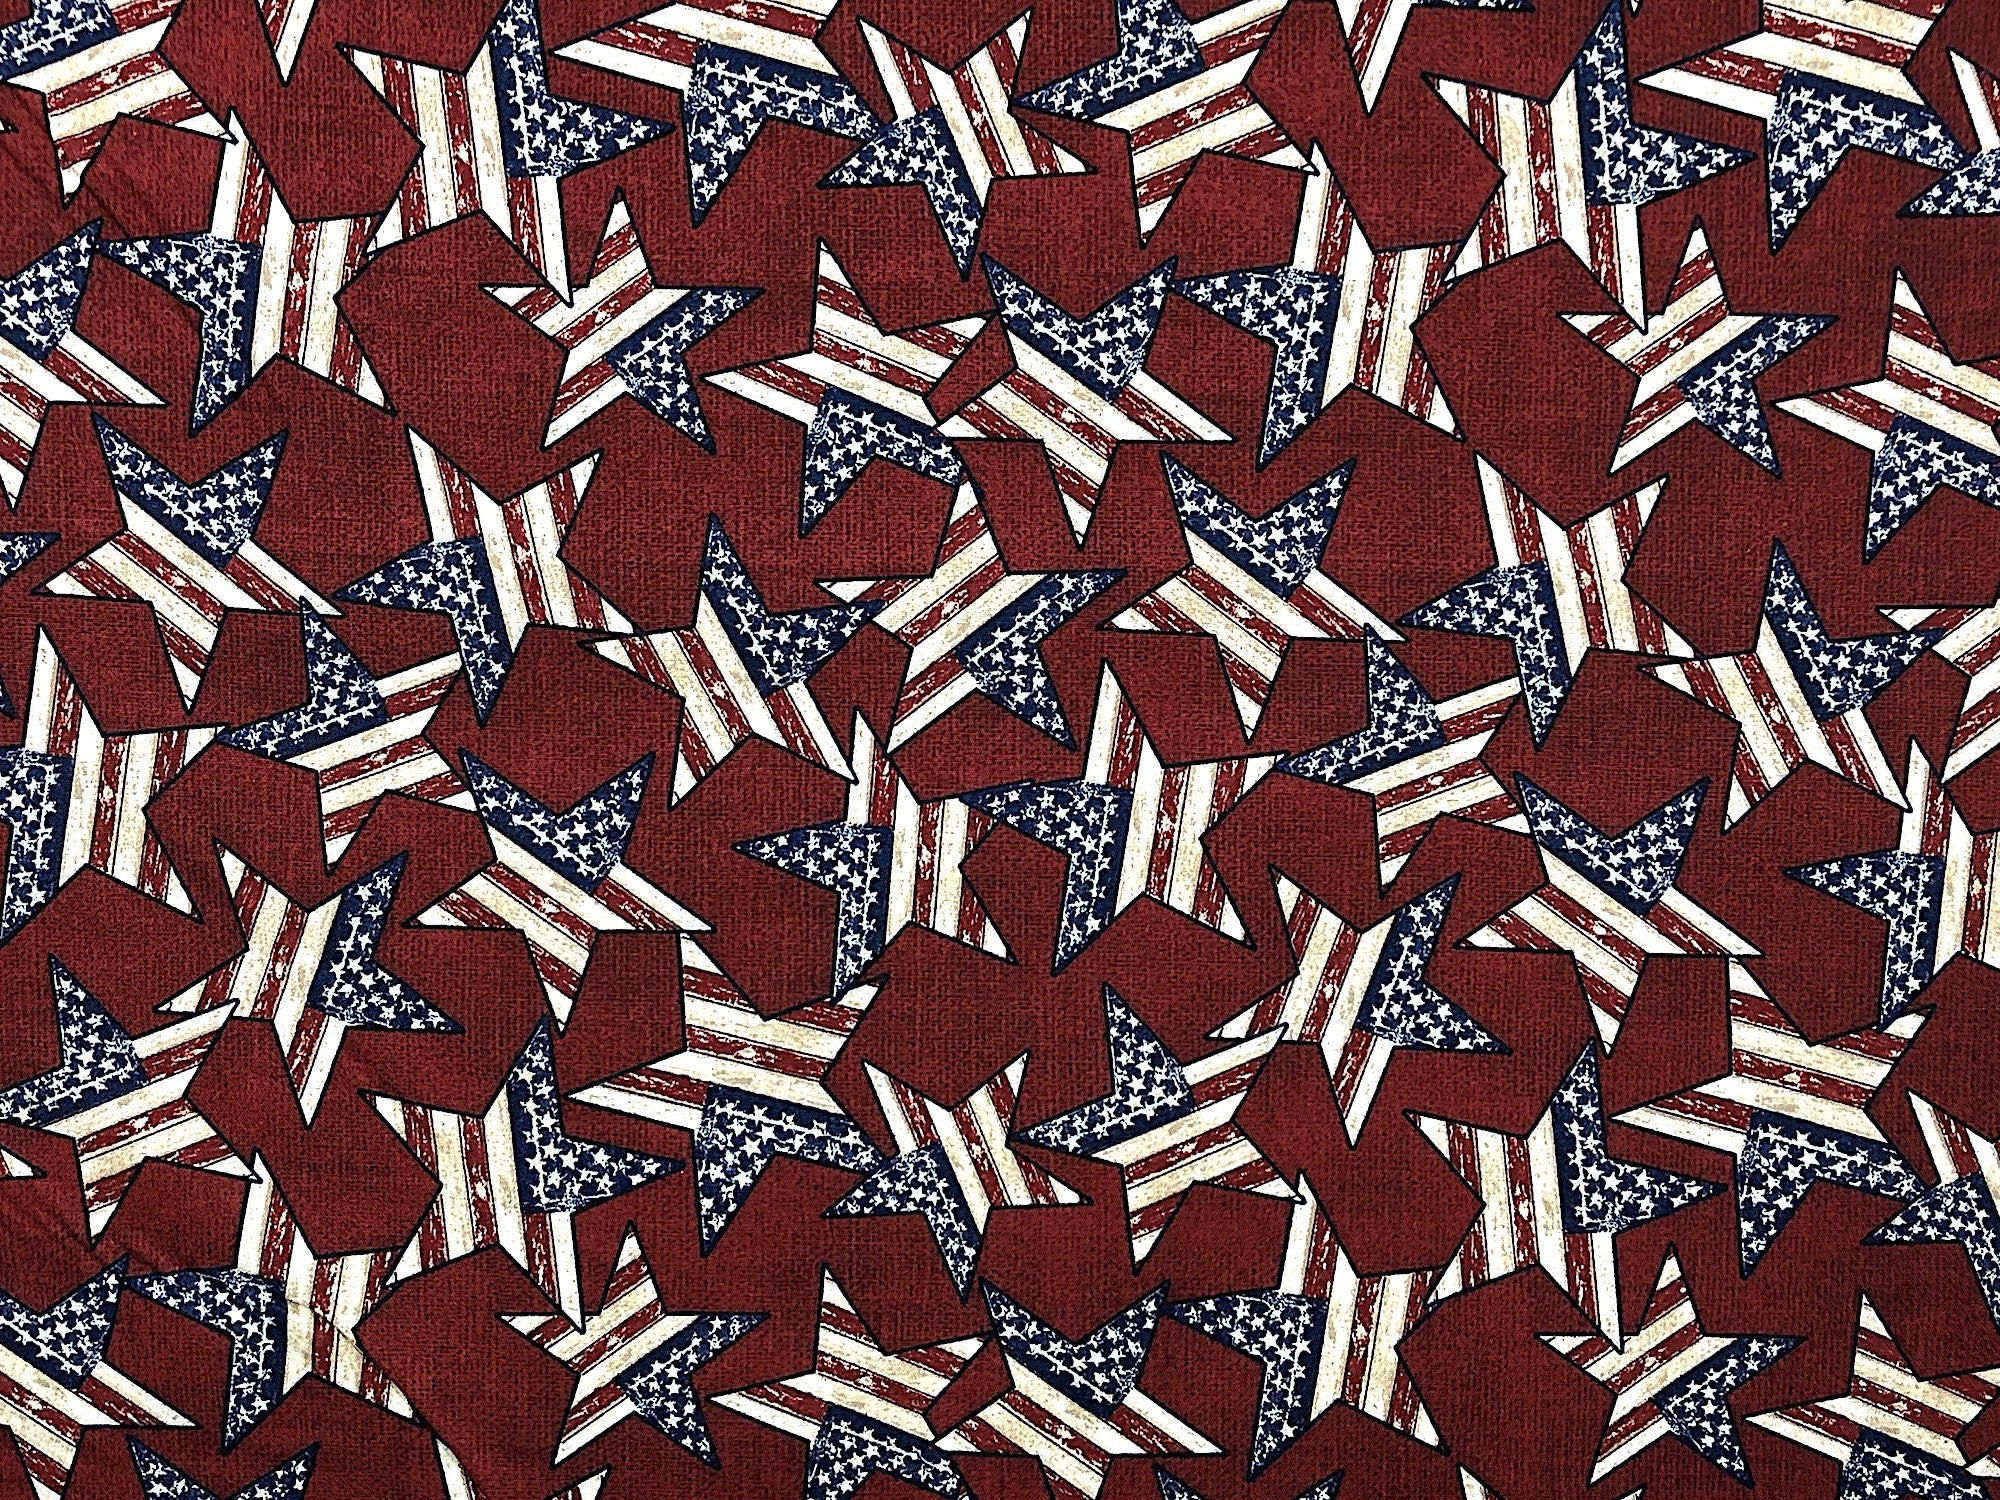 This burgundy fabric is covered with patriotic Stars. This fabric is part of the Patriotic Summer Collection.